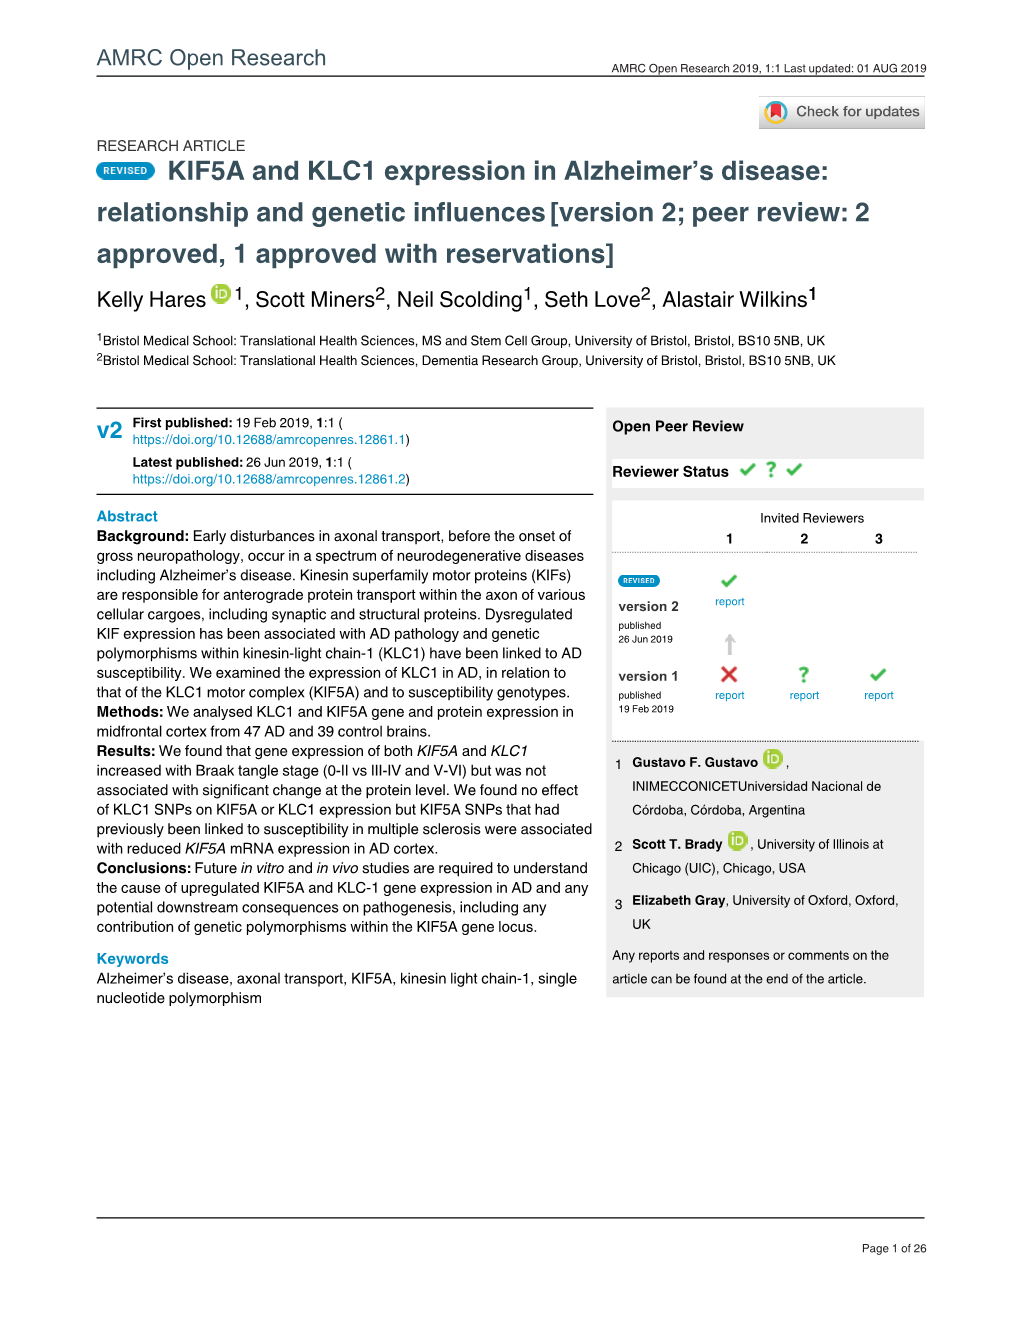 KIF5A and KLC1 Expression in Alzheimer's Disease